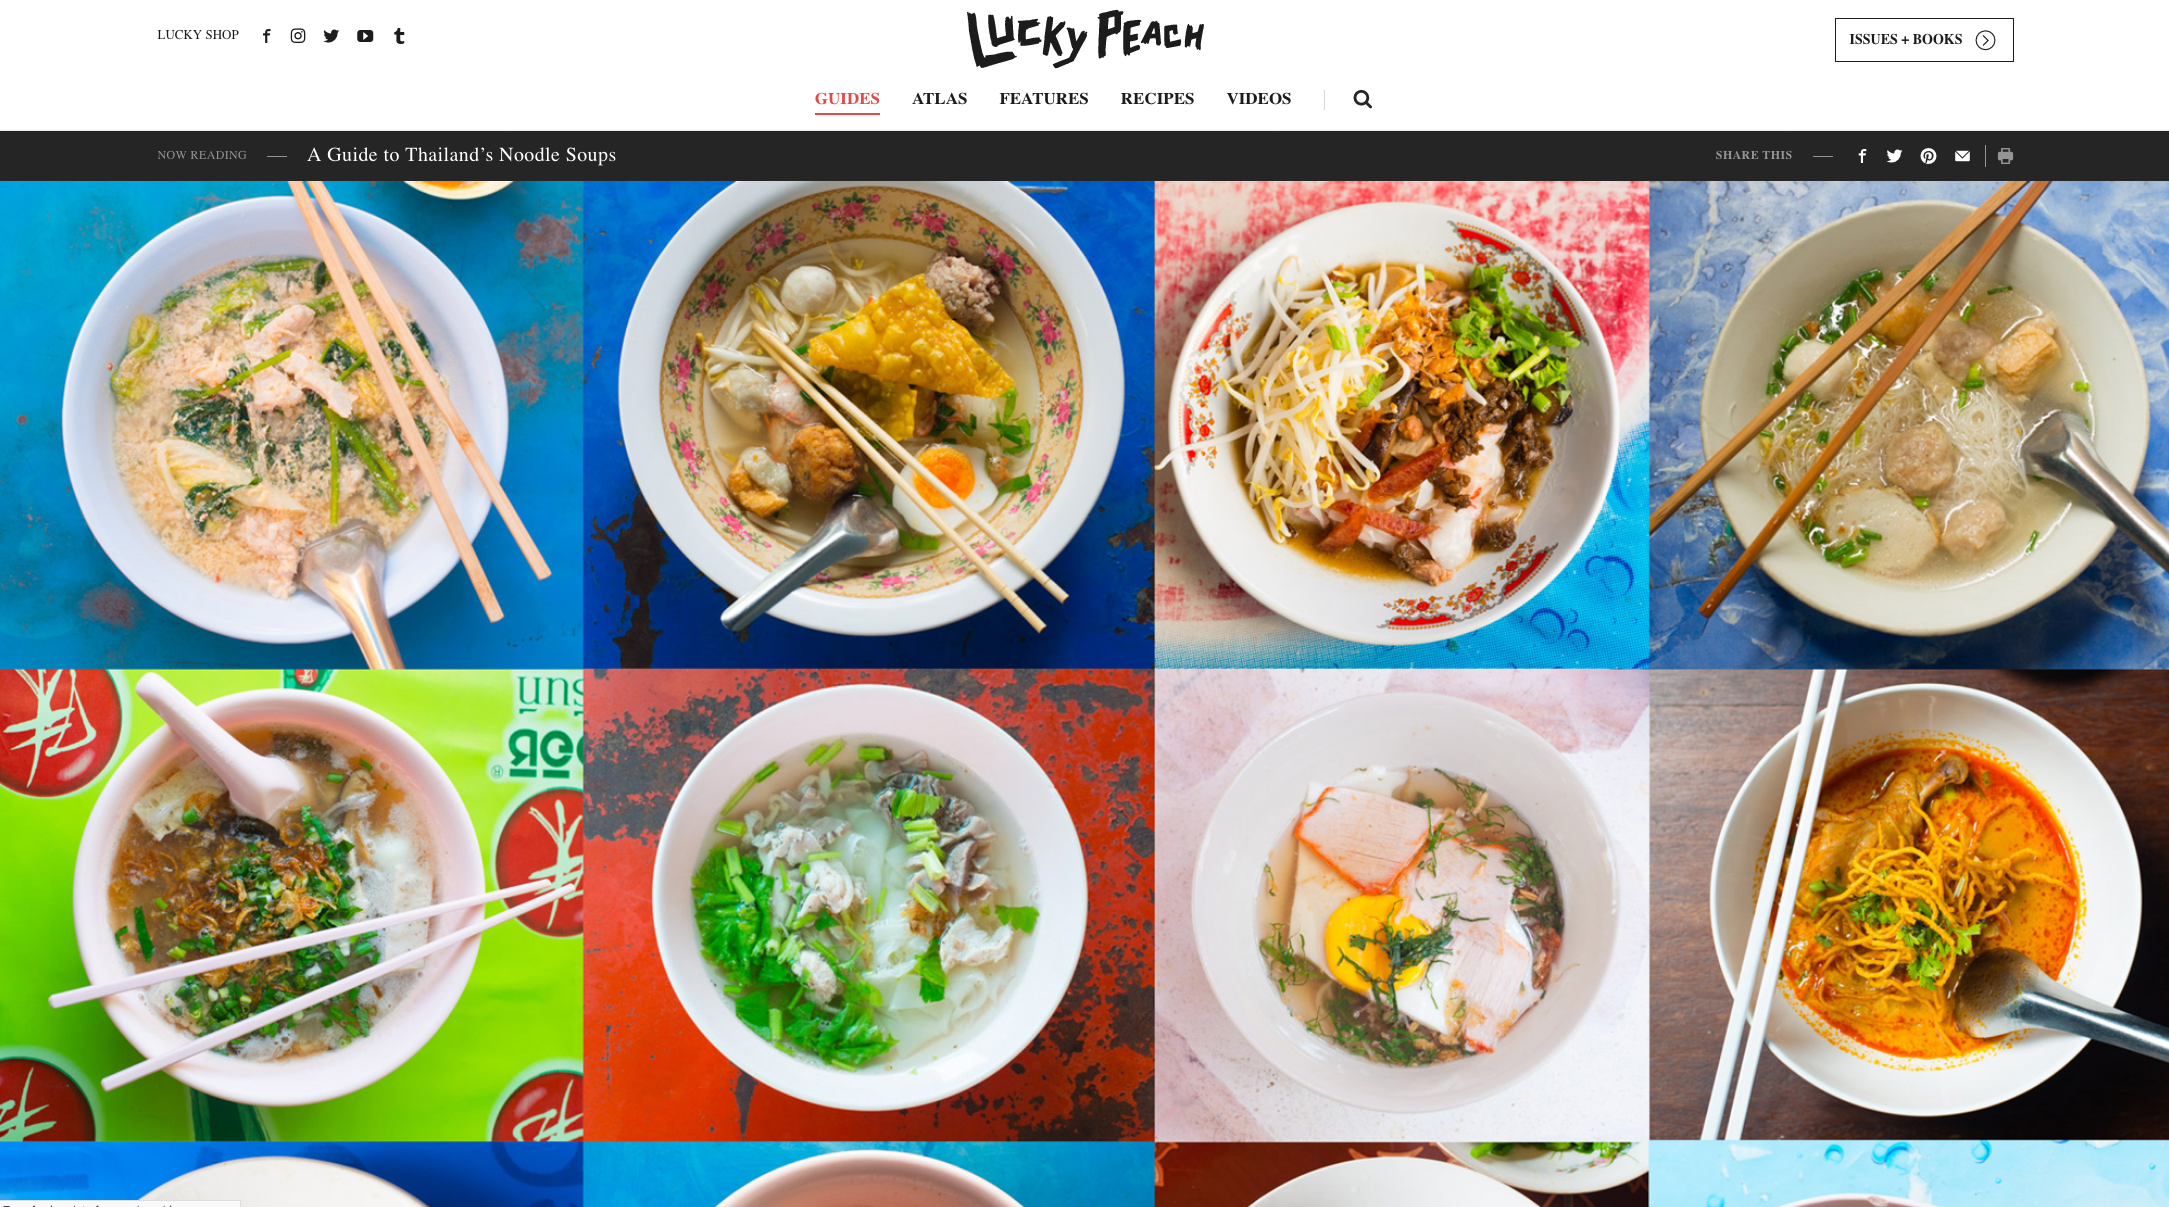  Text and photos: " A Guide to Thailand's Noodle Soup Dishes ", Lucky Peach online. 